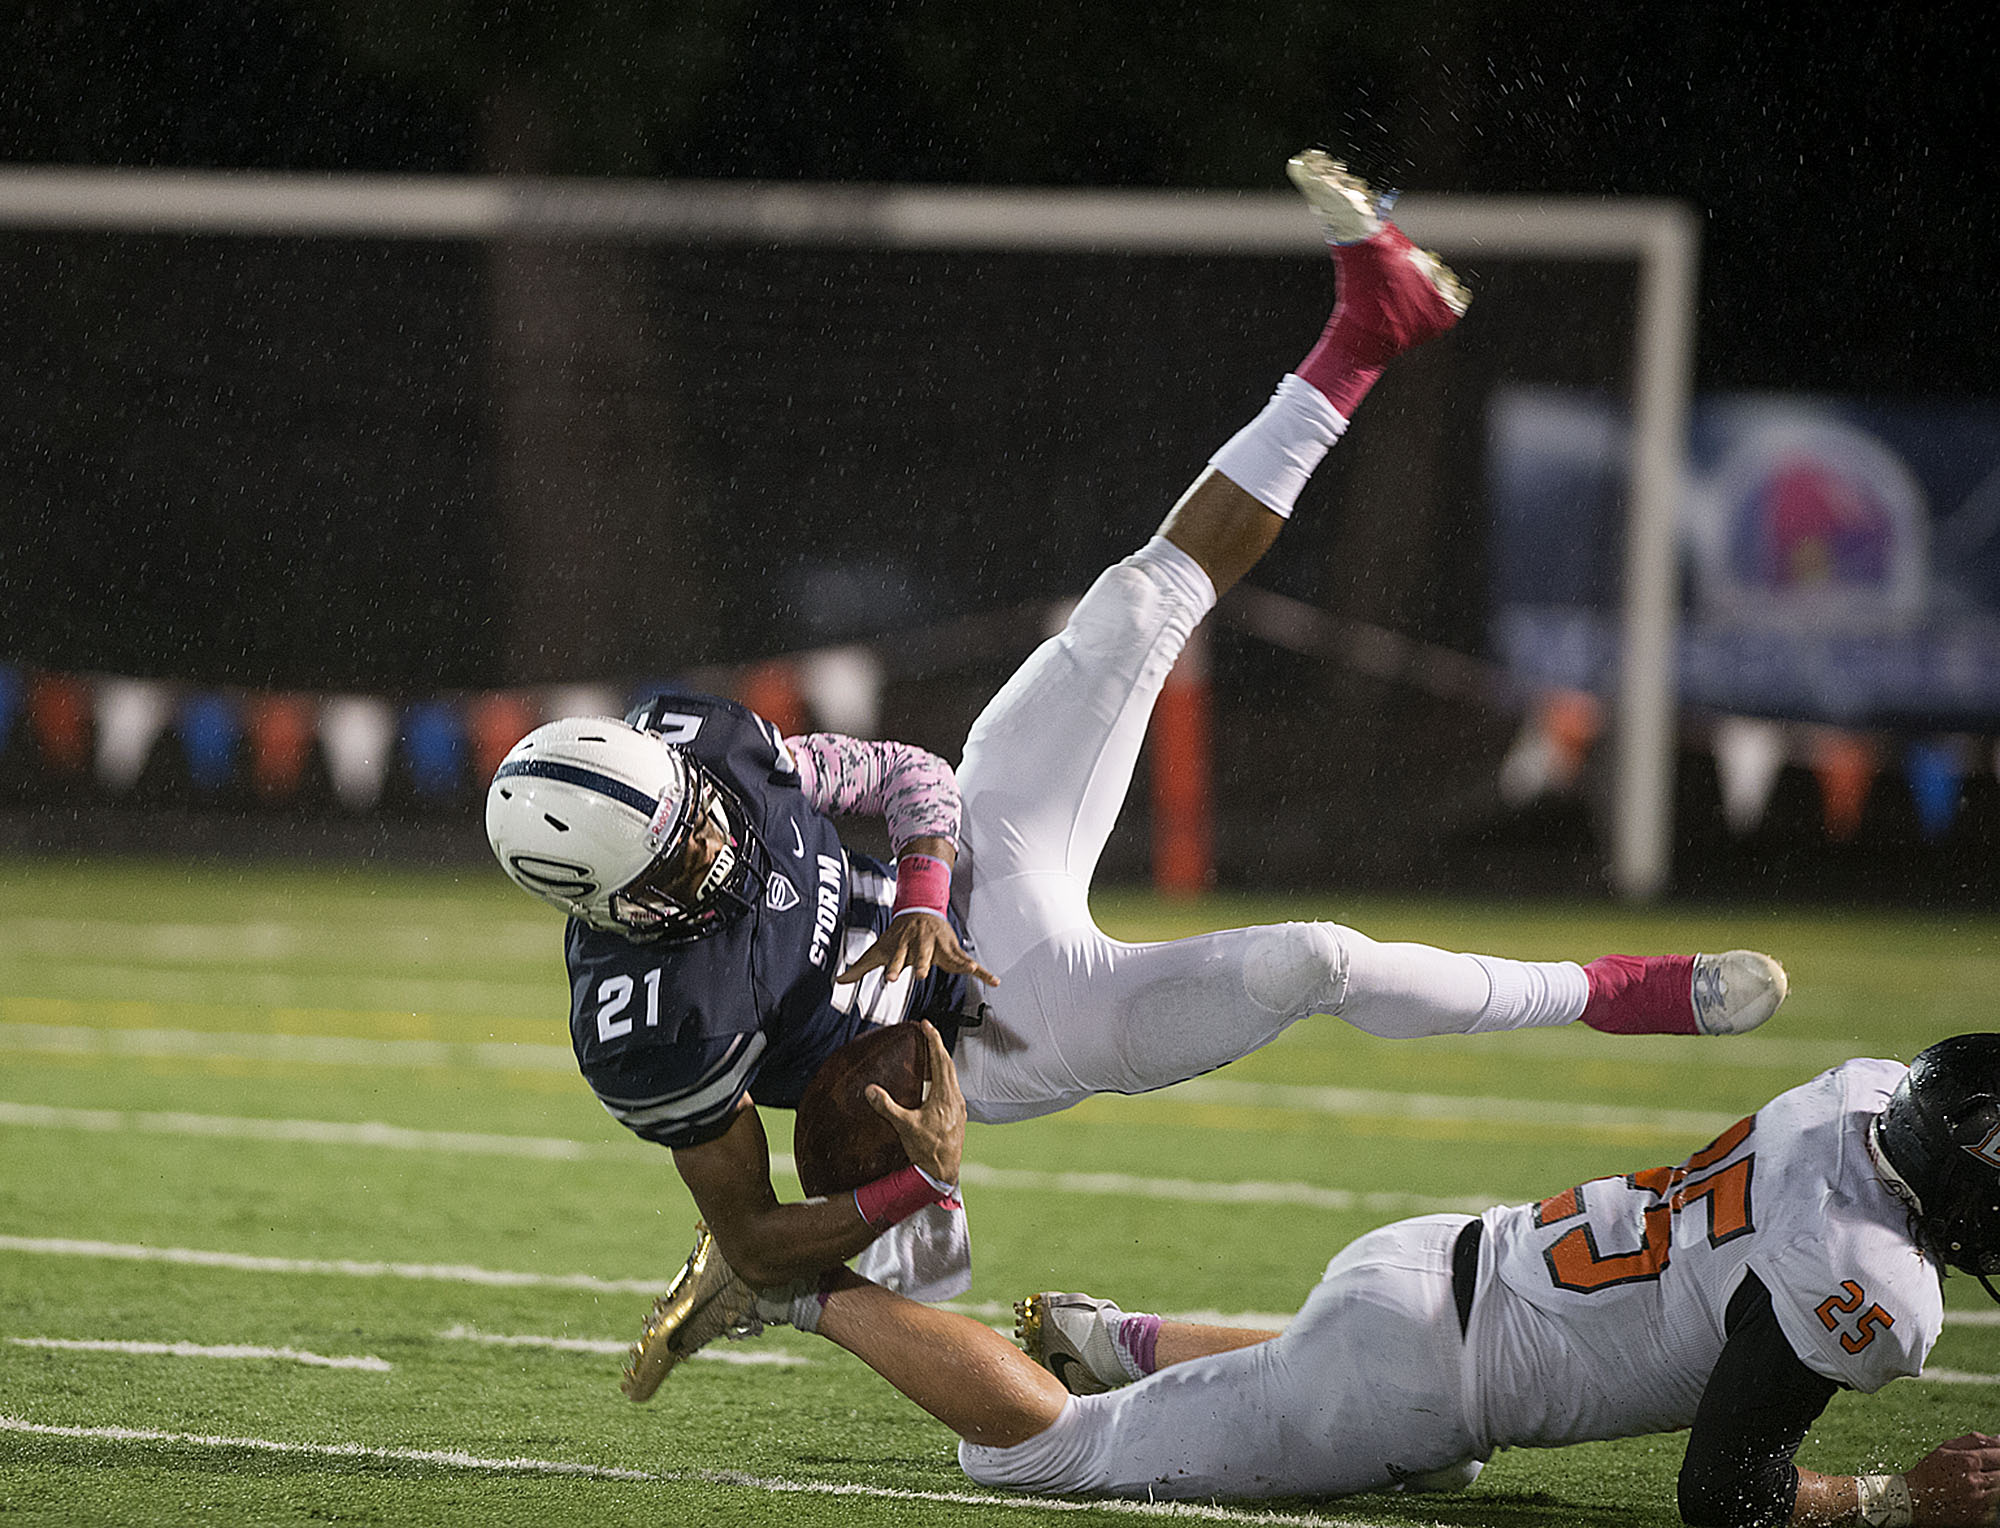 Skyview's Jeremiah Wright (21) is taken down by Battle Ground's Max Randle (25) at Kiggins Bowl on Thursday night, Oct. 13, 2016.